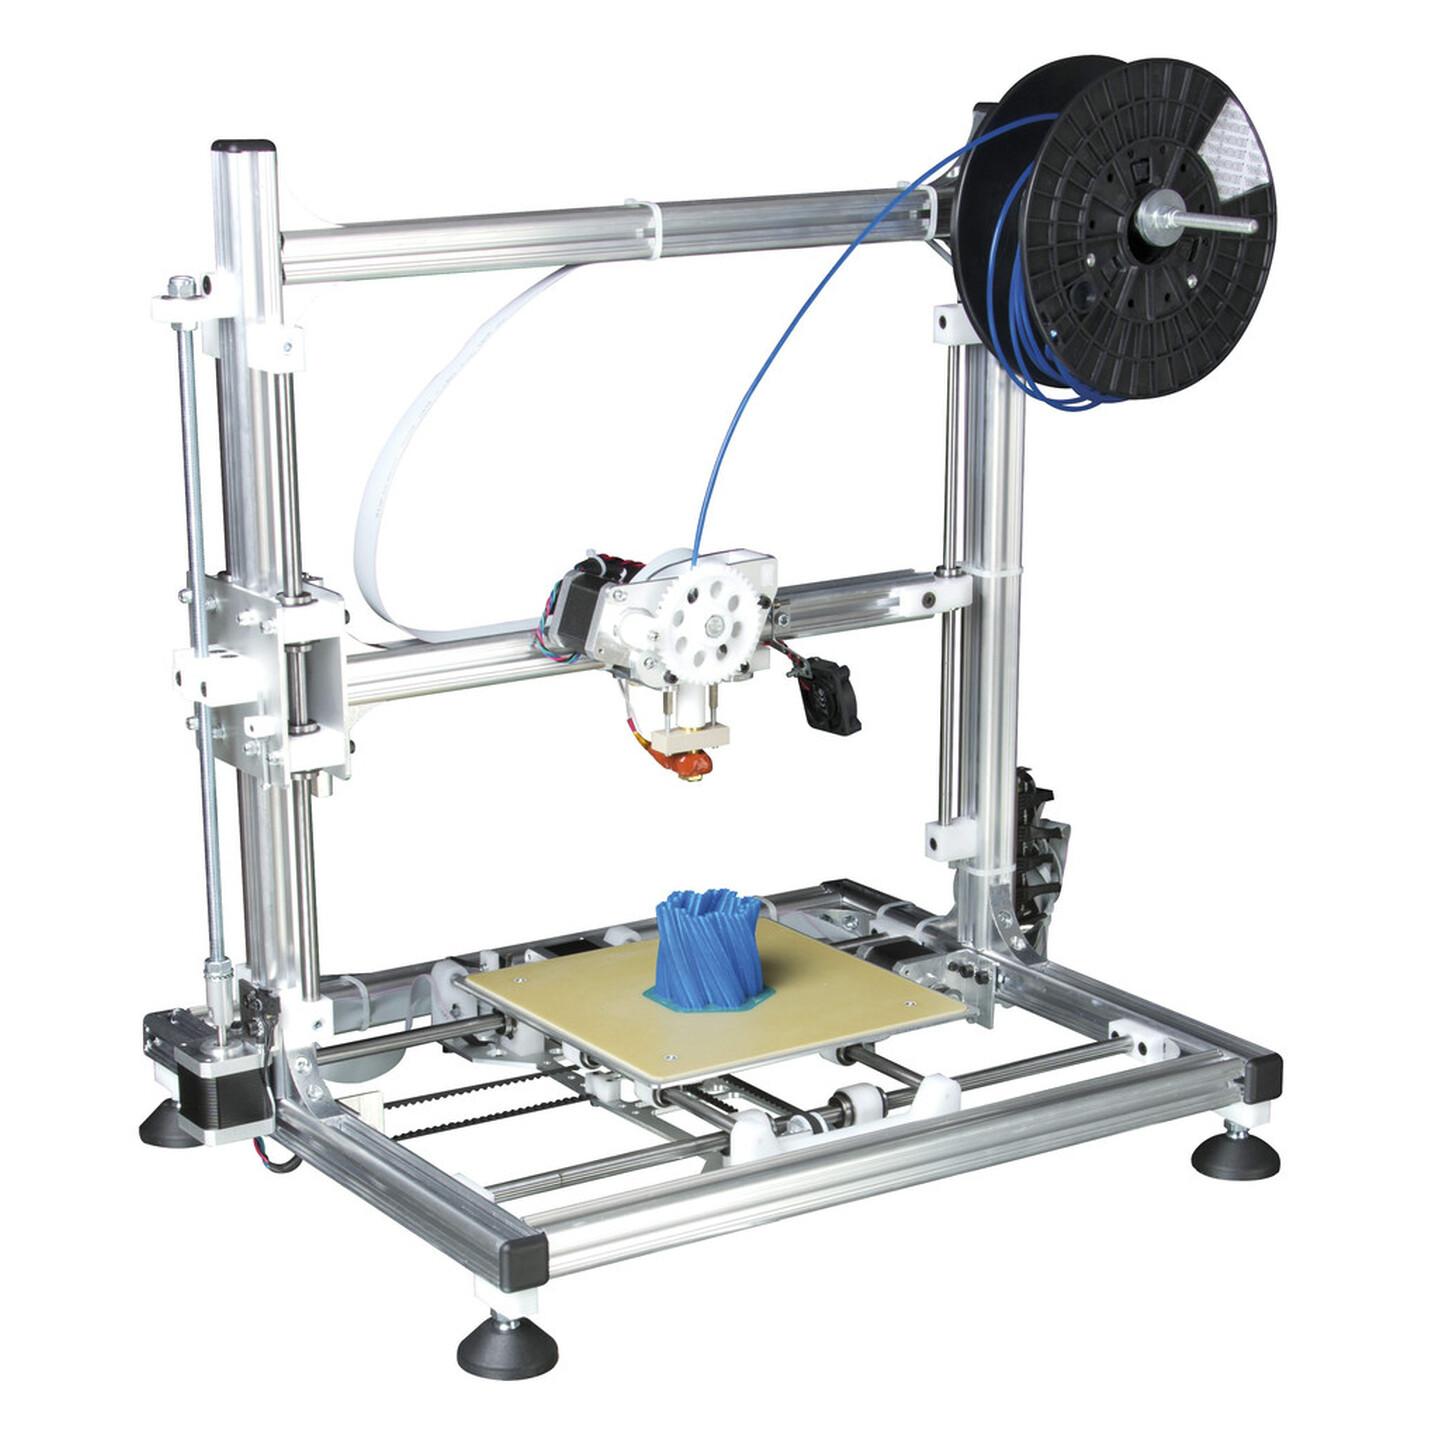 3D Printer Kit with Heated Bed